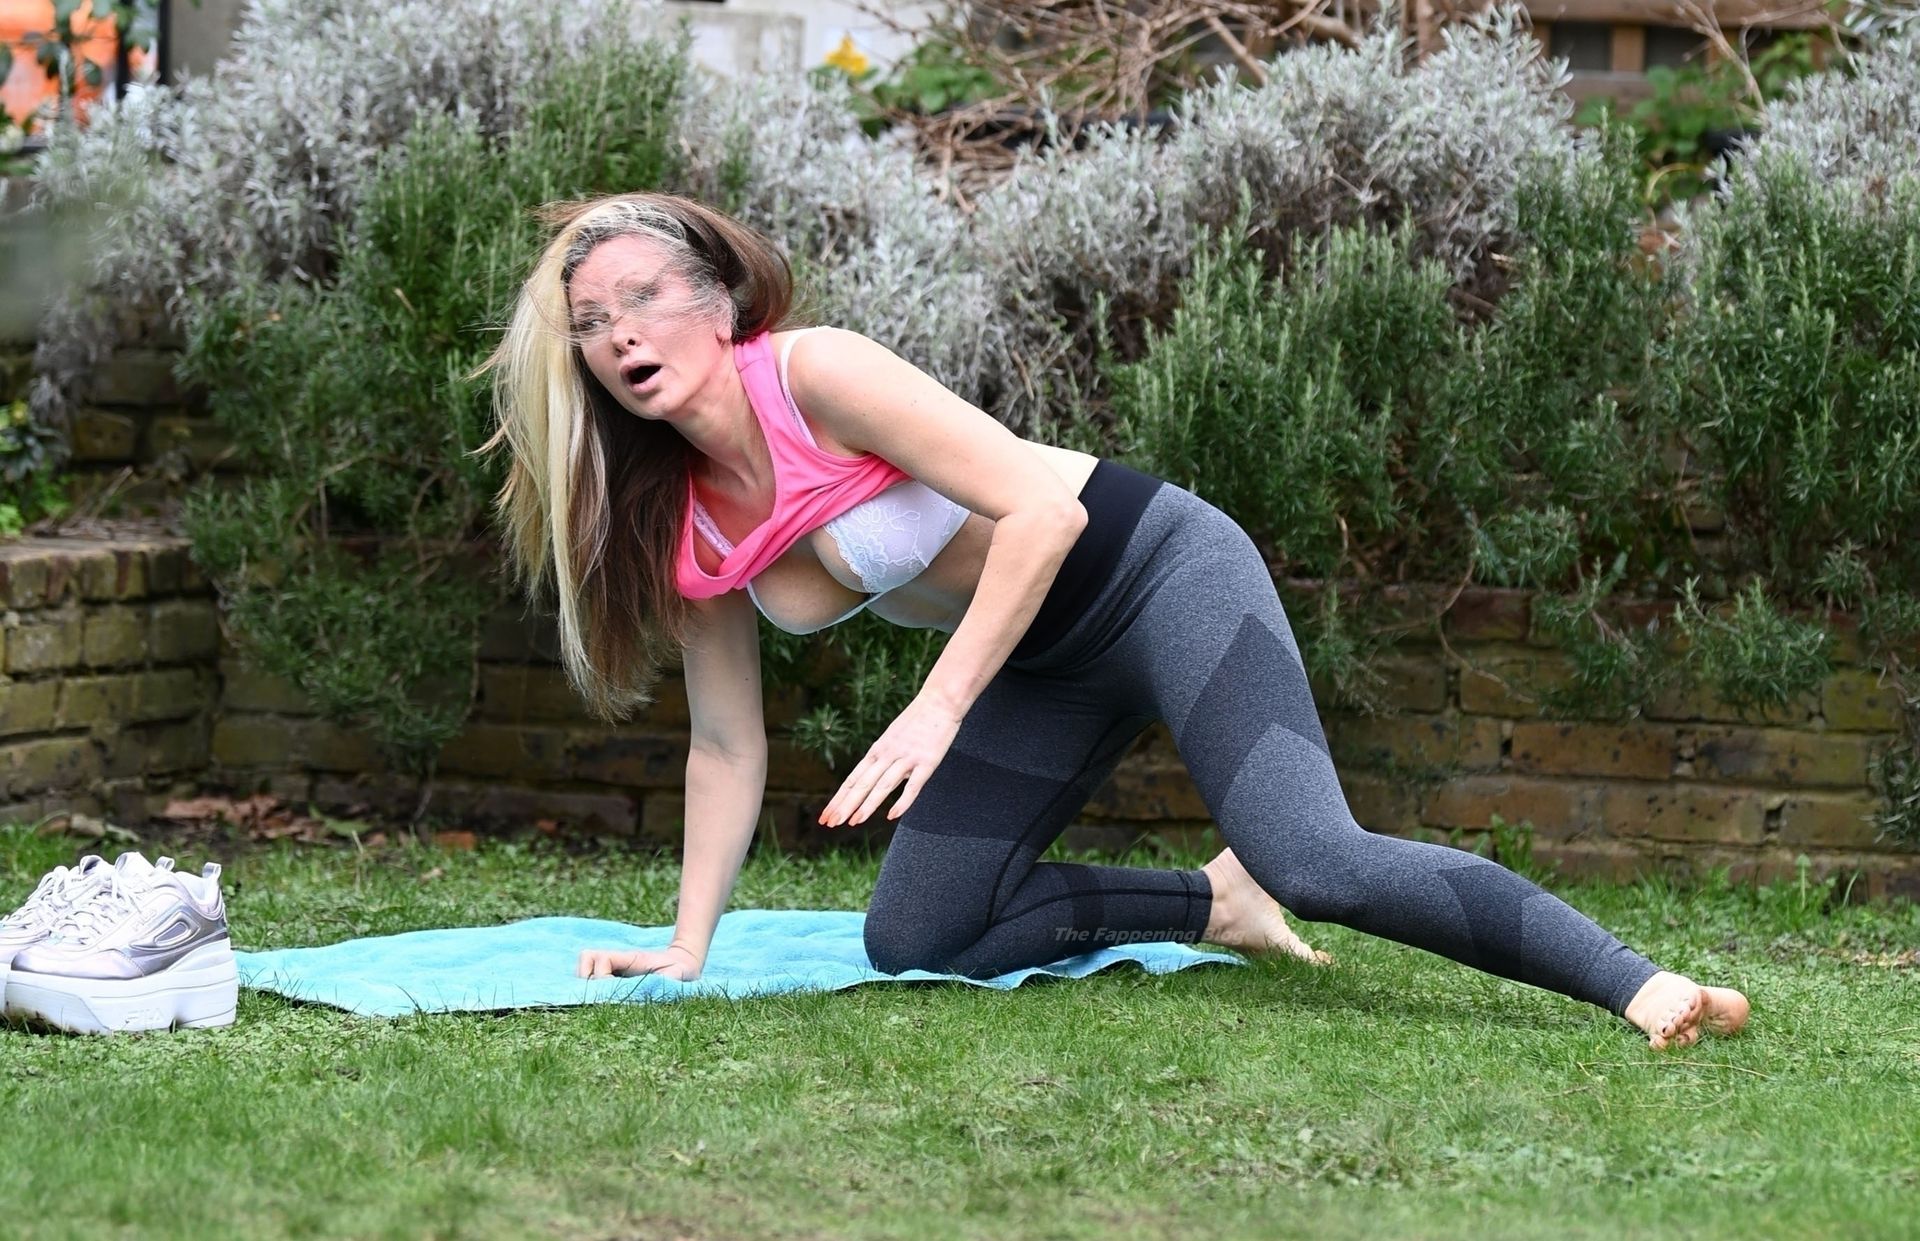 Caprice Practices the Art of Yoga at a London Park (18 Photos)